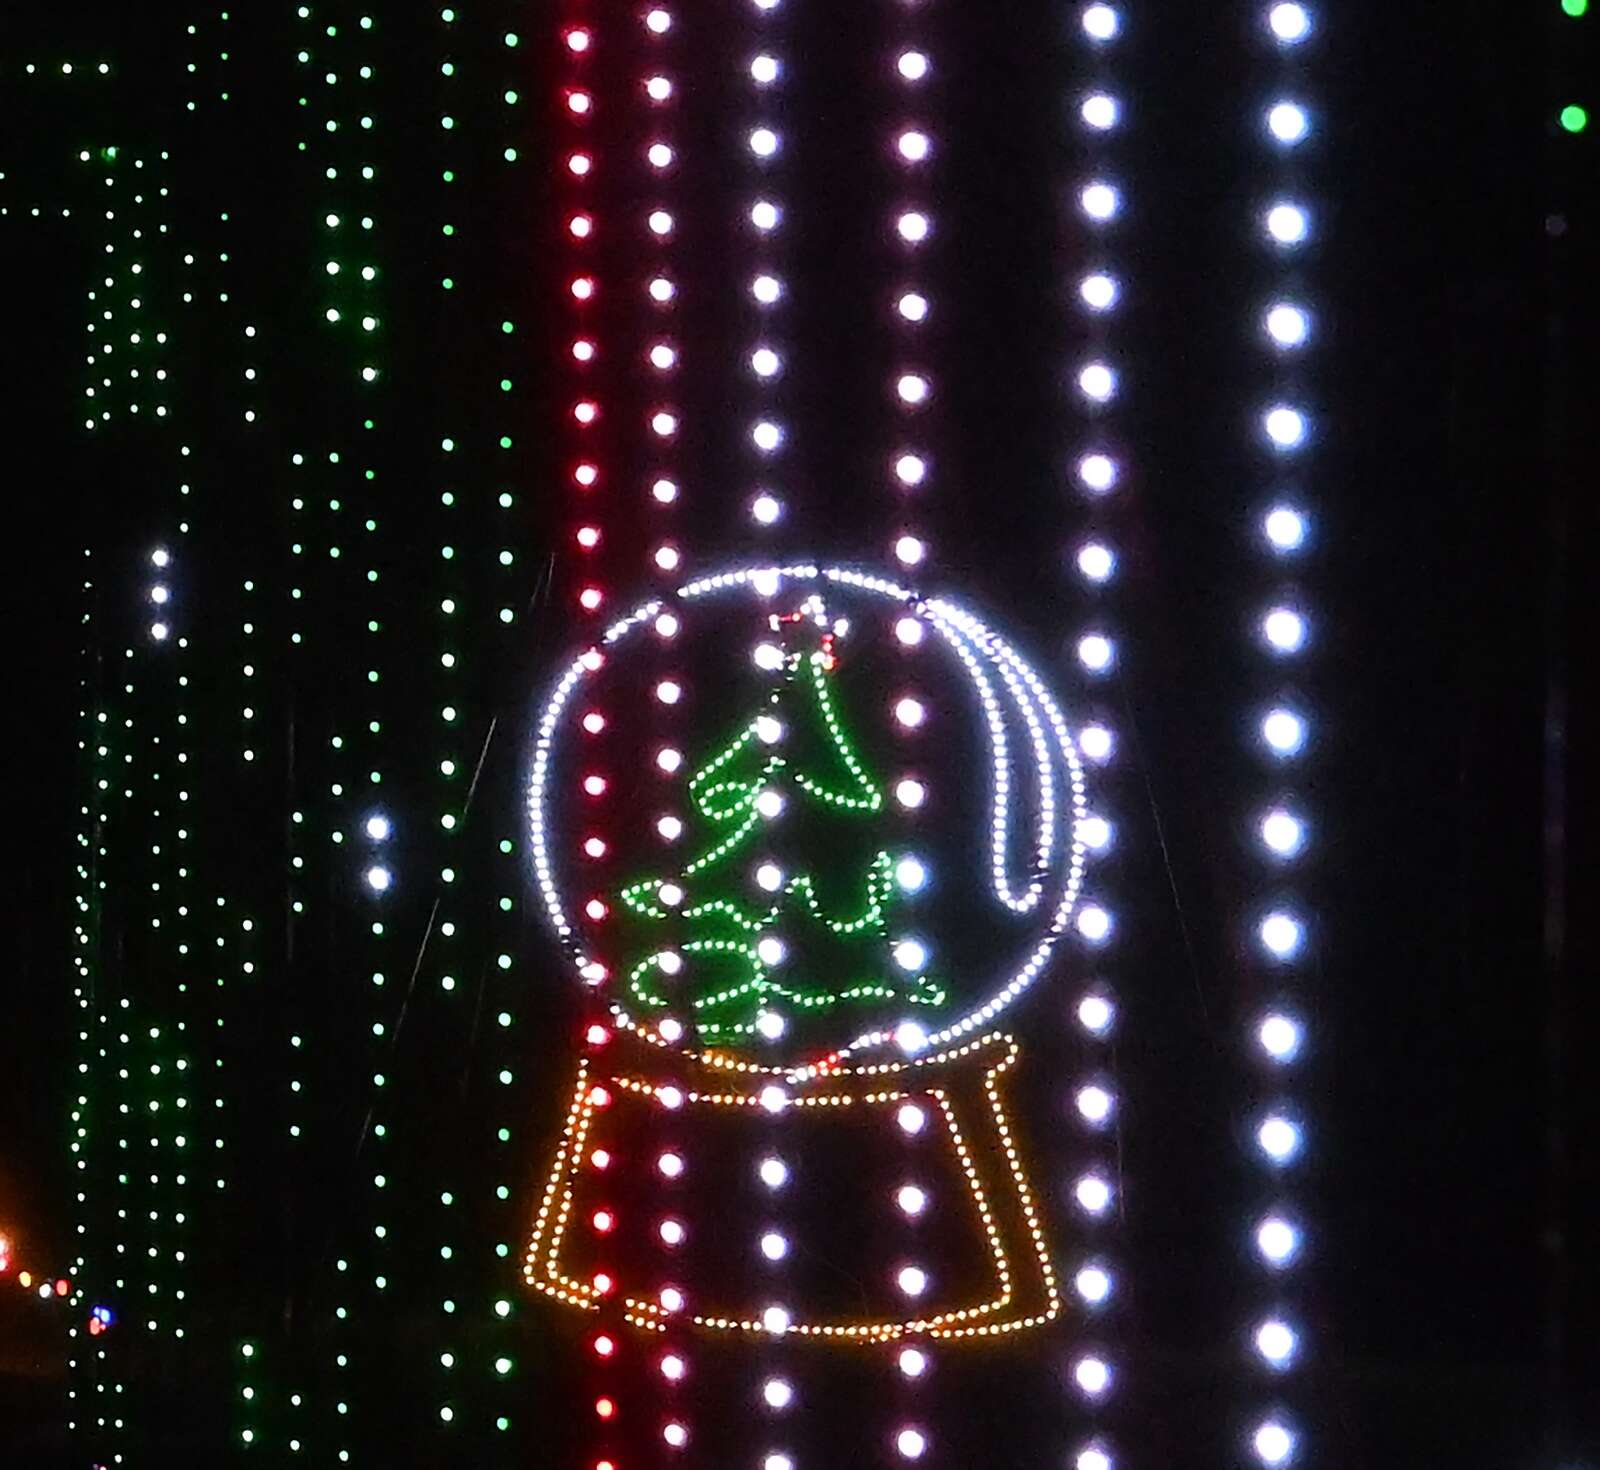 A snow globe is part of the light display at the Big Butler Holiday Spectacular